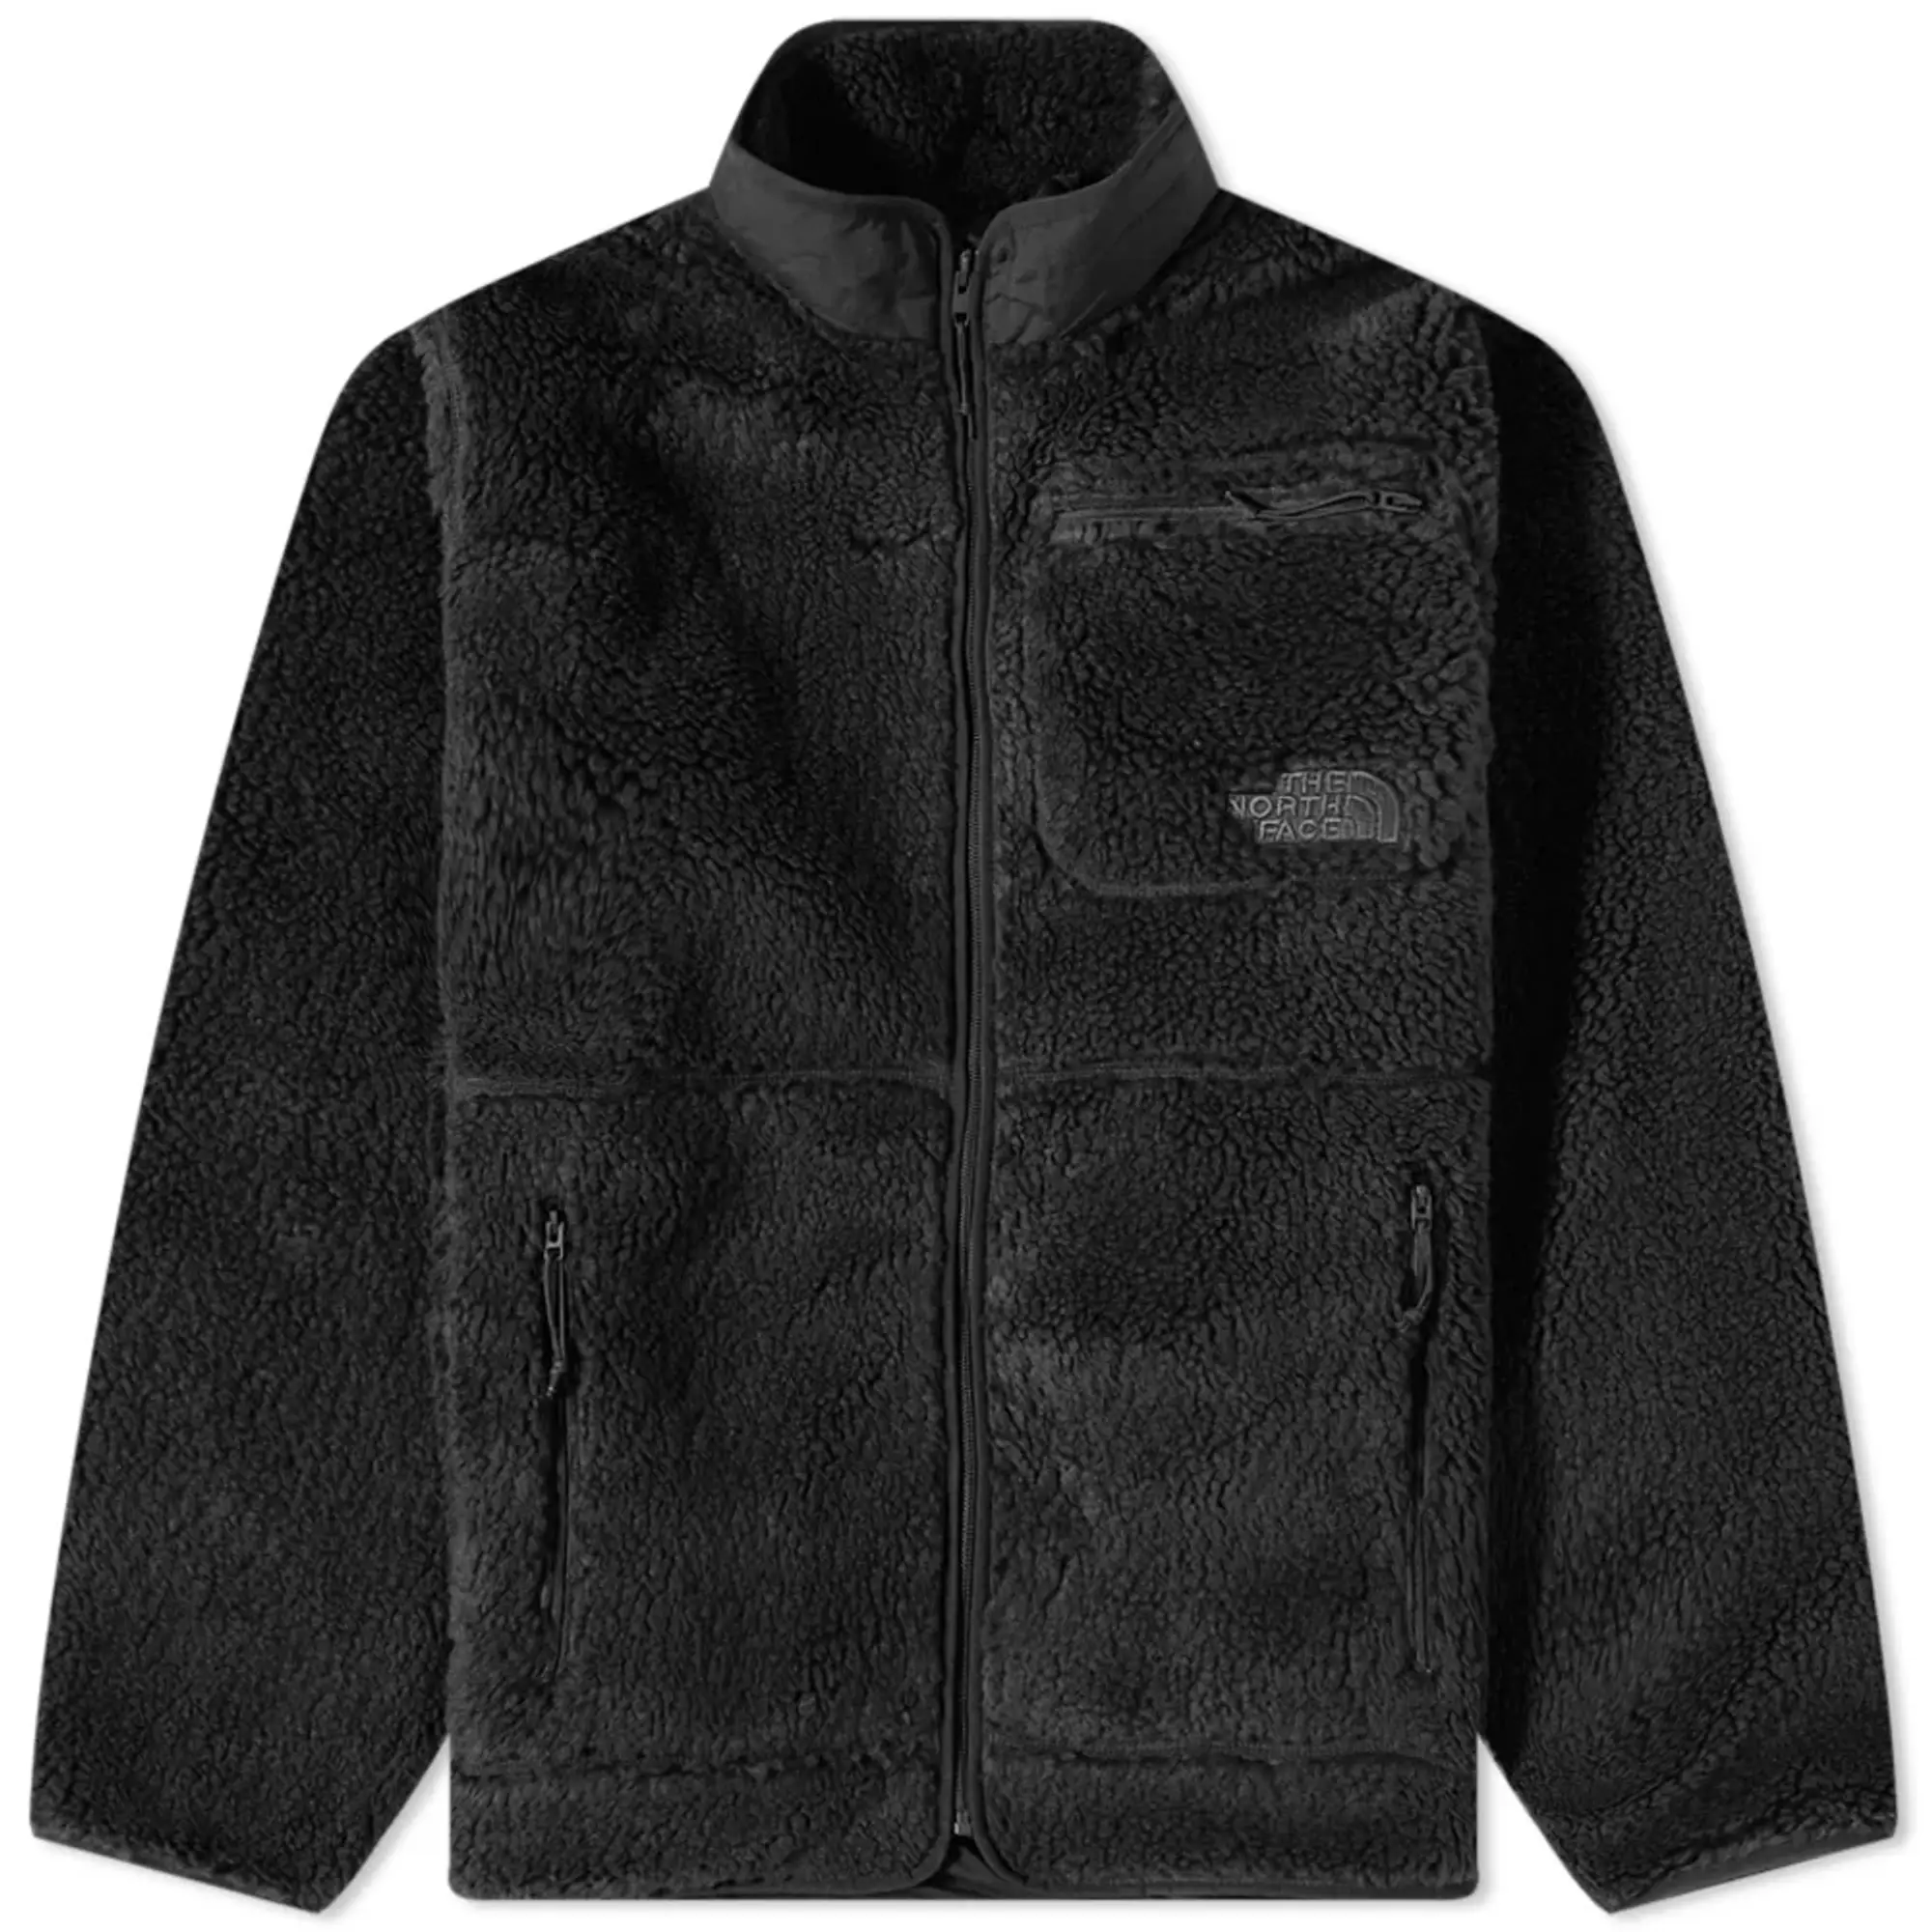 The North Face Men's Extreme Pile Full Zip Jacket Black